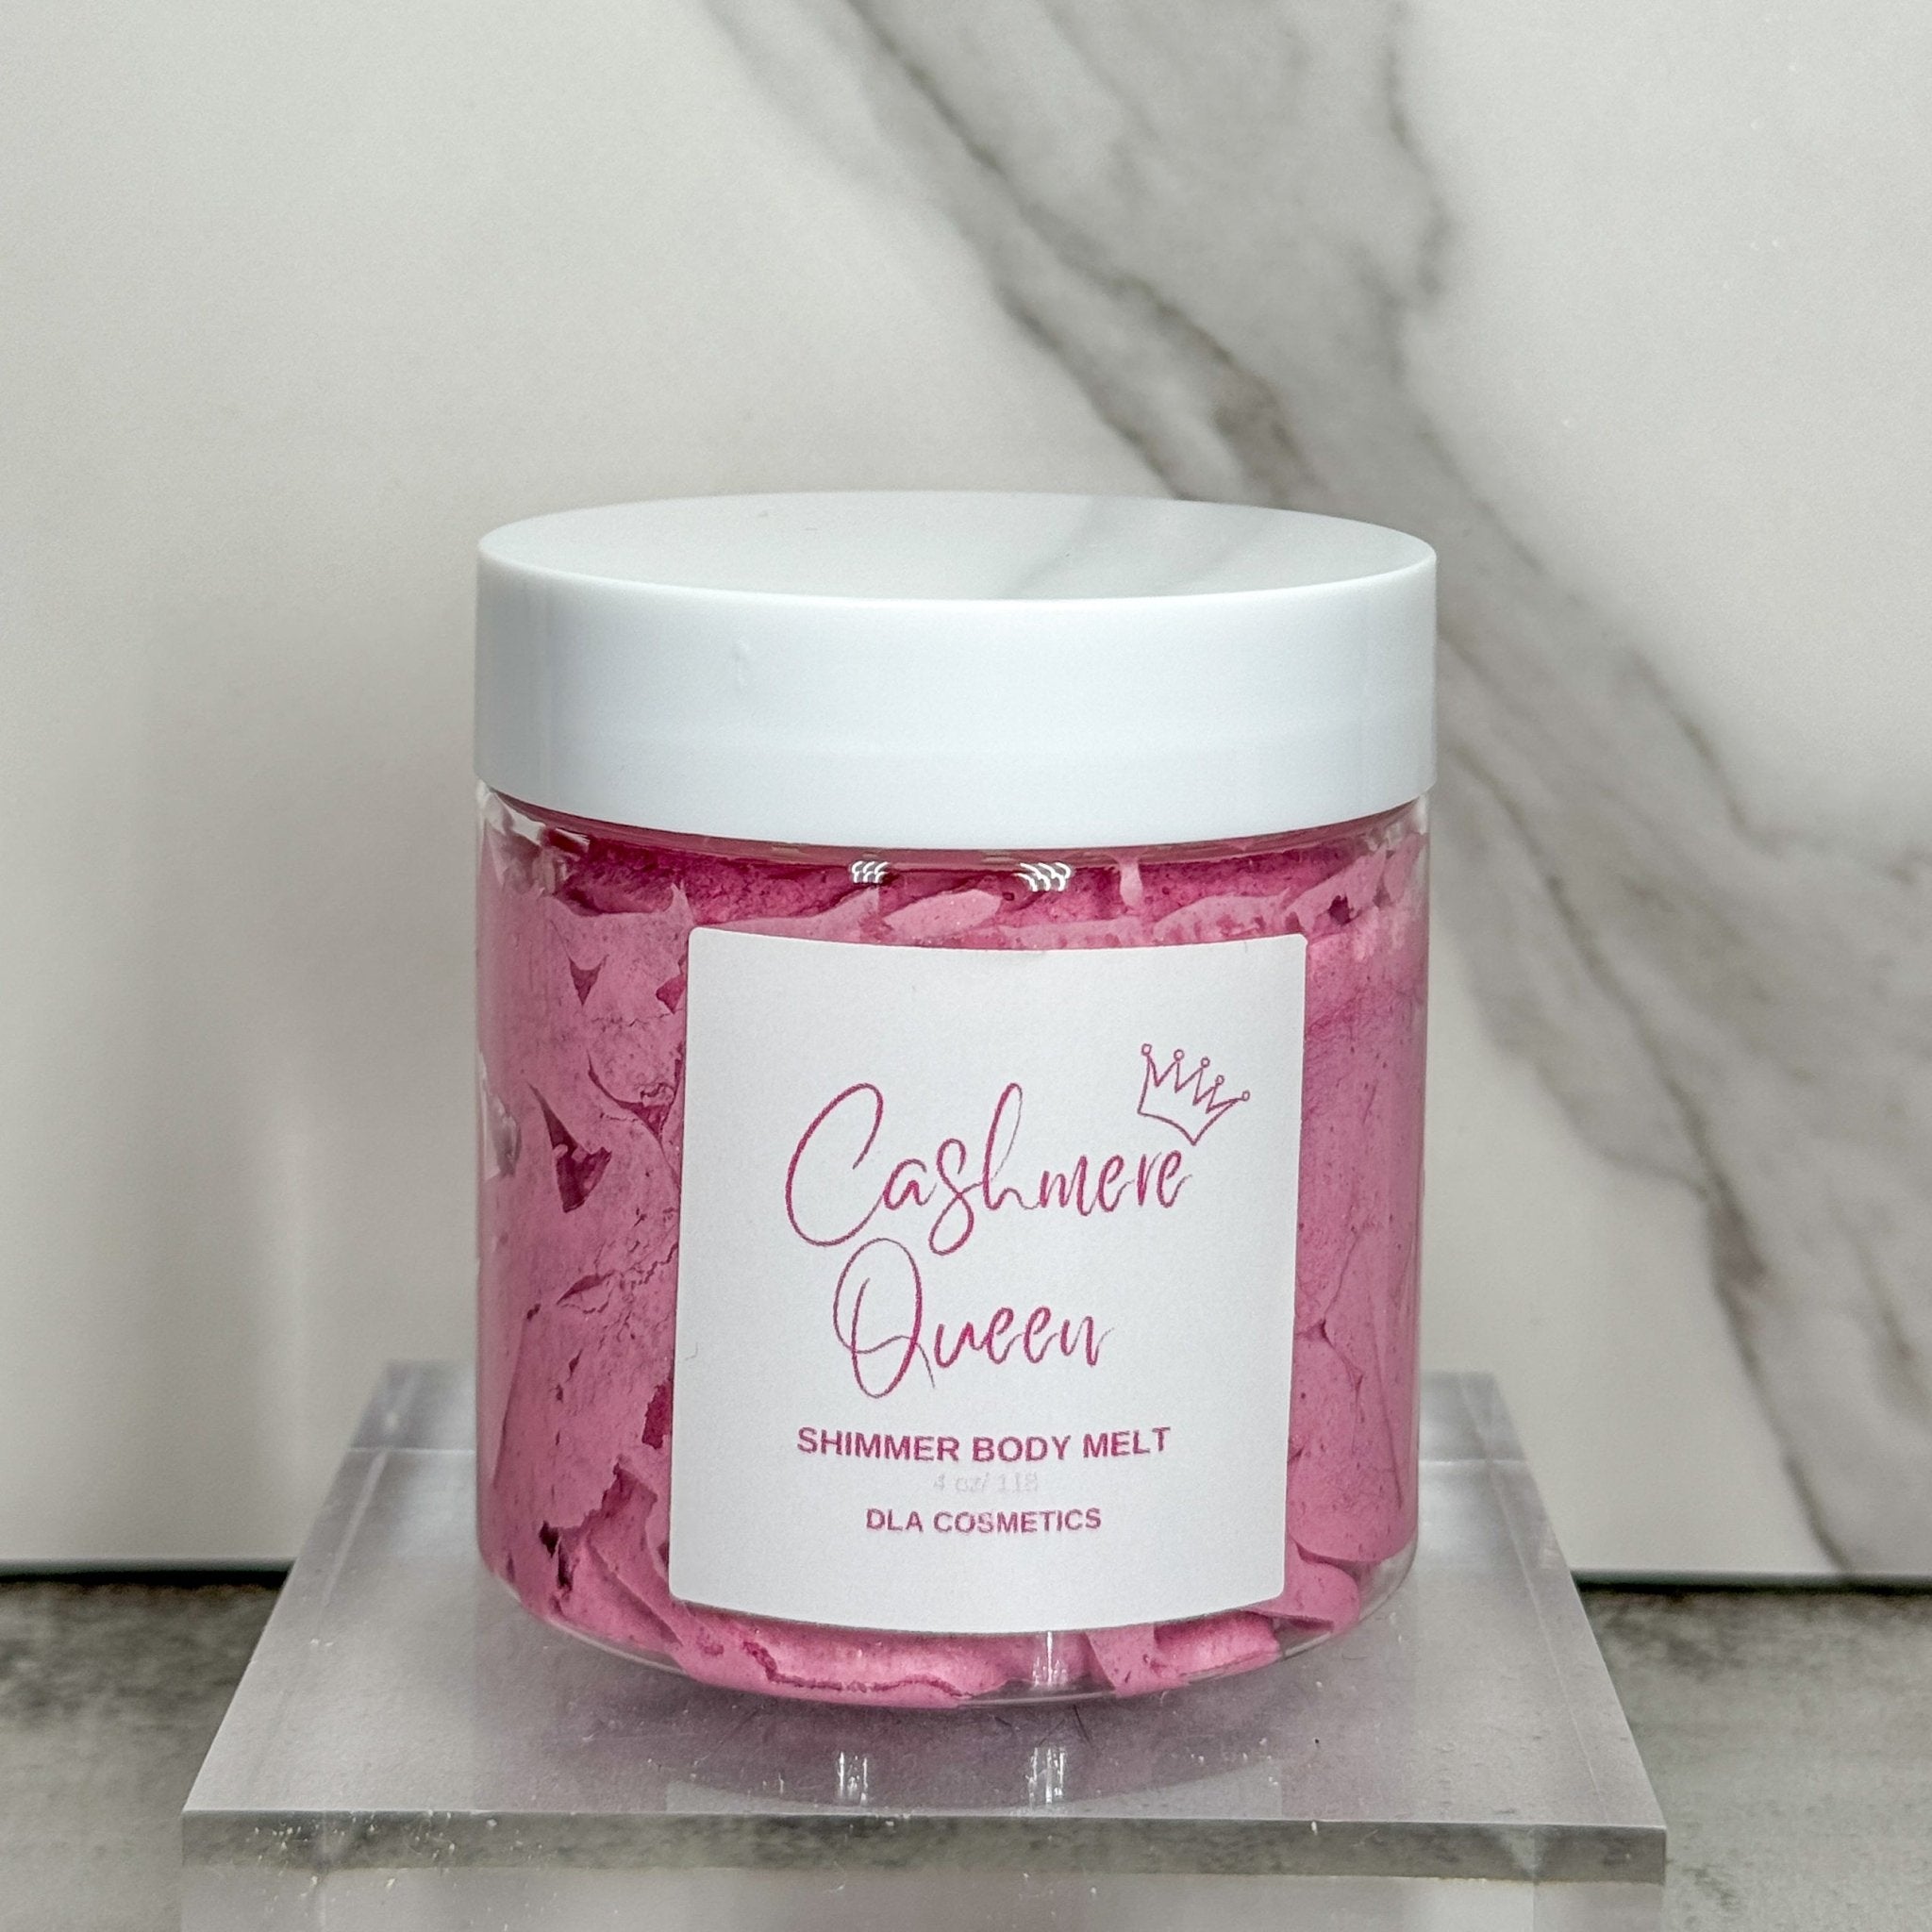 CASHMERE QUEEN SHIMMER BODY BUTTER - DLA Cosmetics